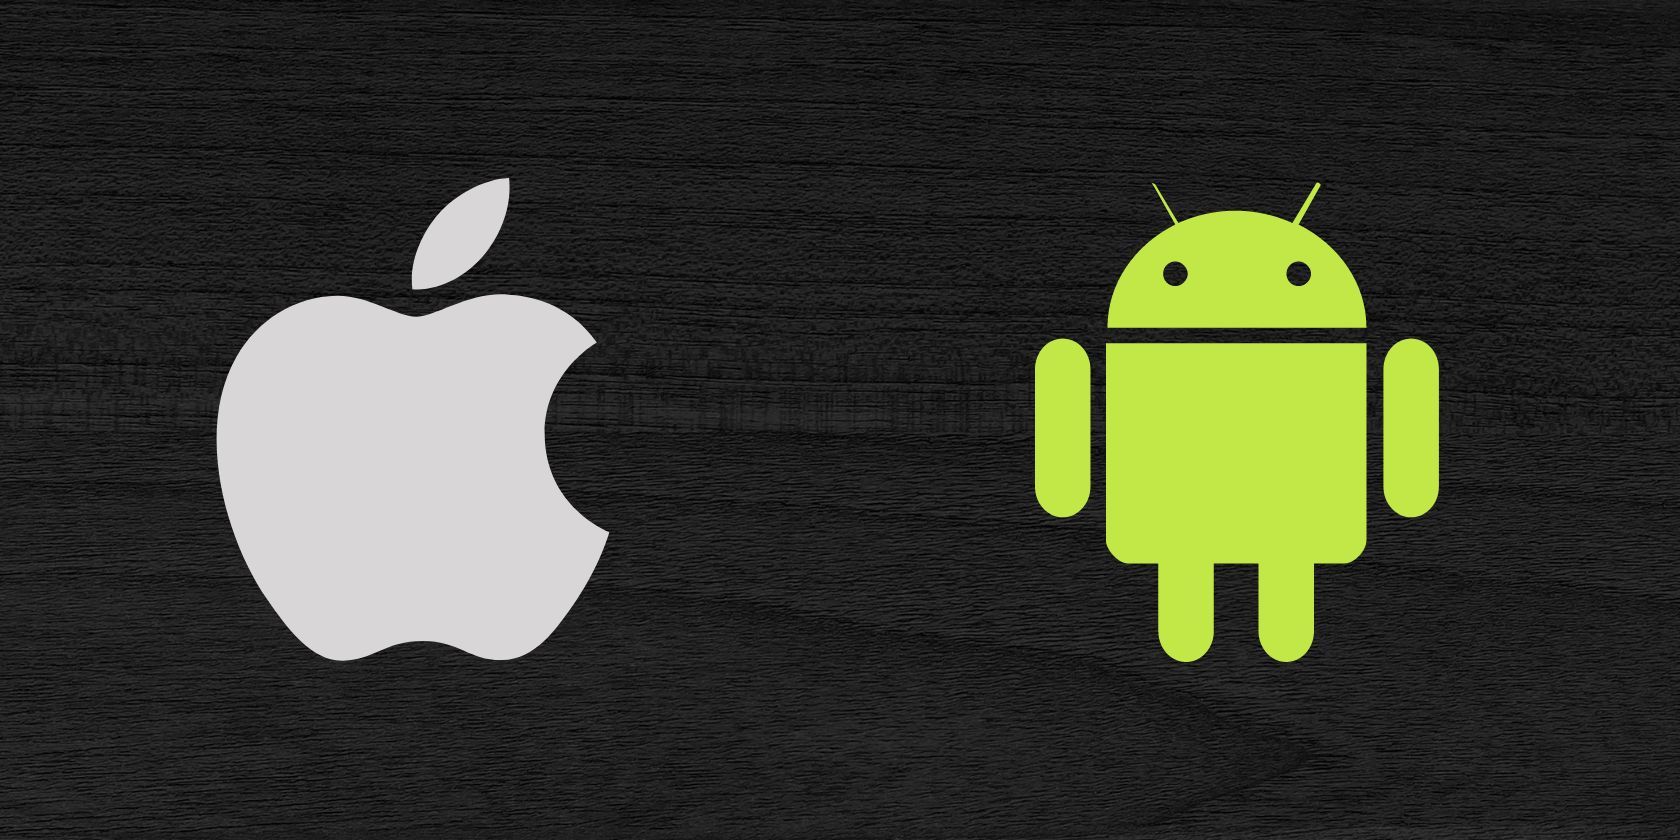 Apple and Android logos seen on dark background